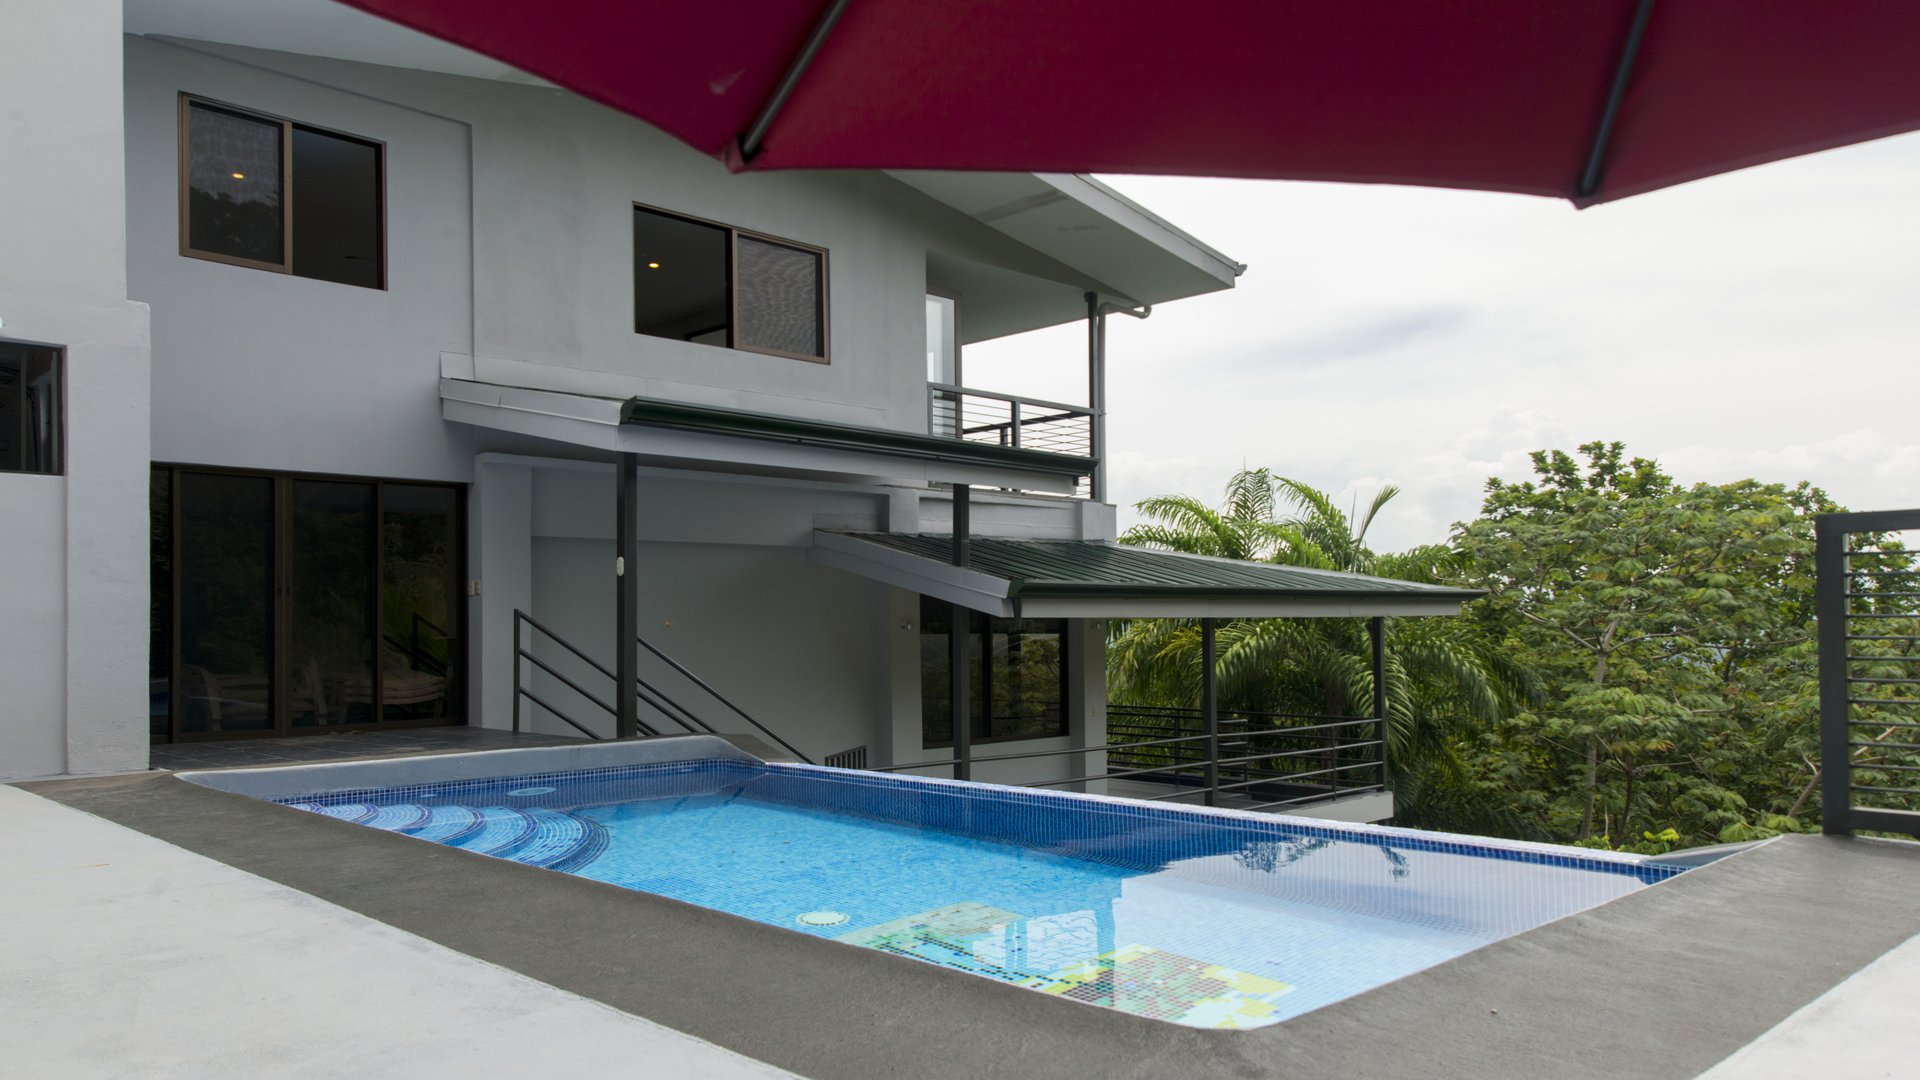 The private pool looks out over the gorgeous mountains of Manuel Antonio and the tropical jungle surrounding the villa.